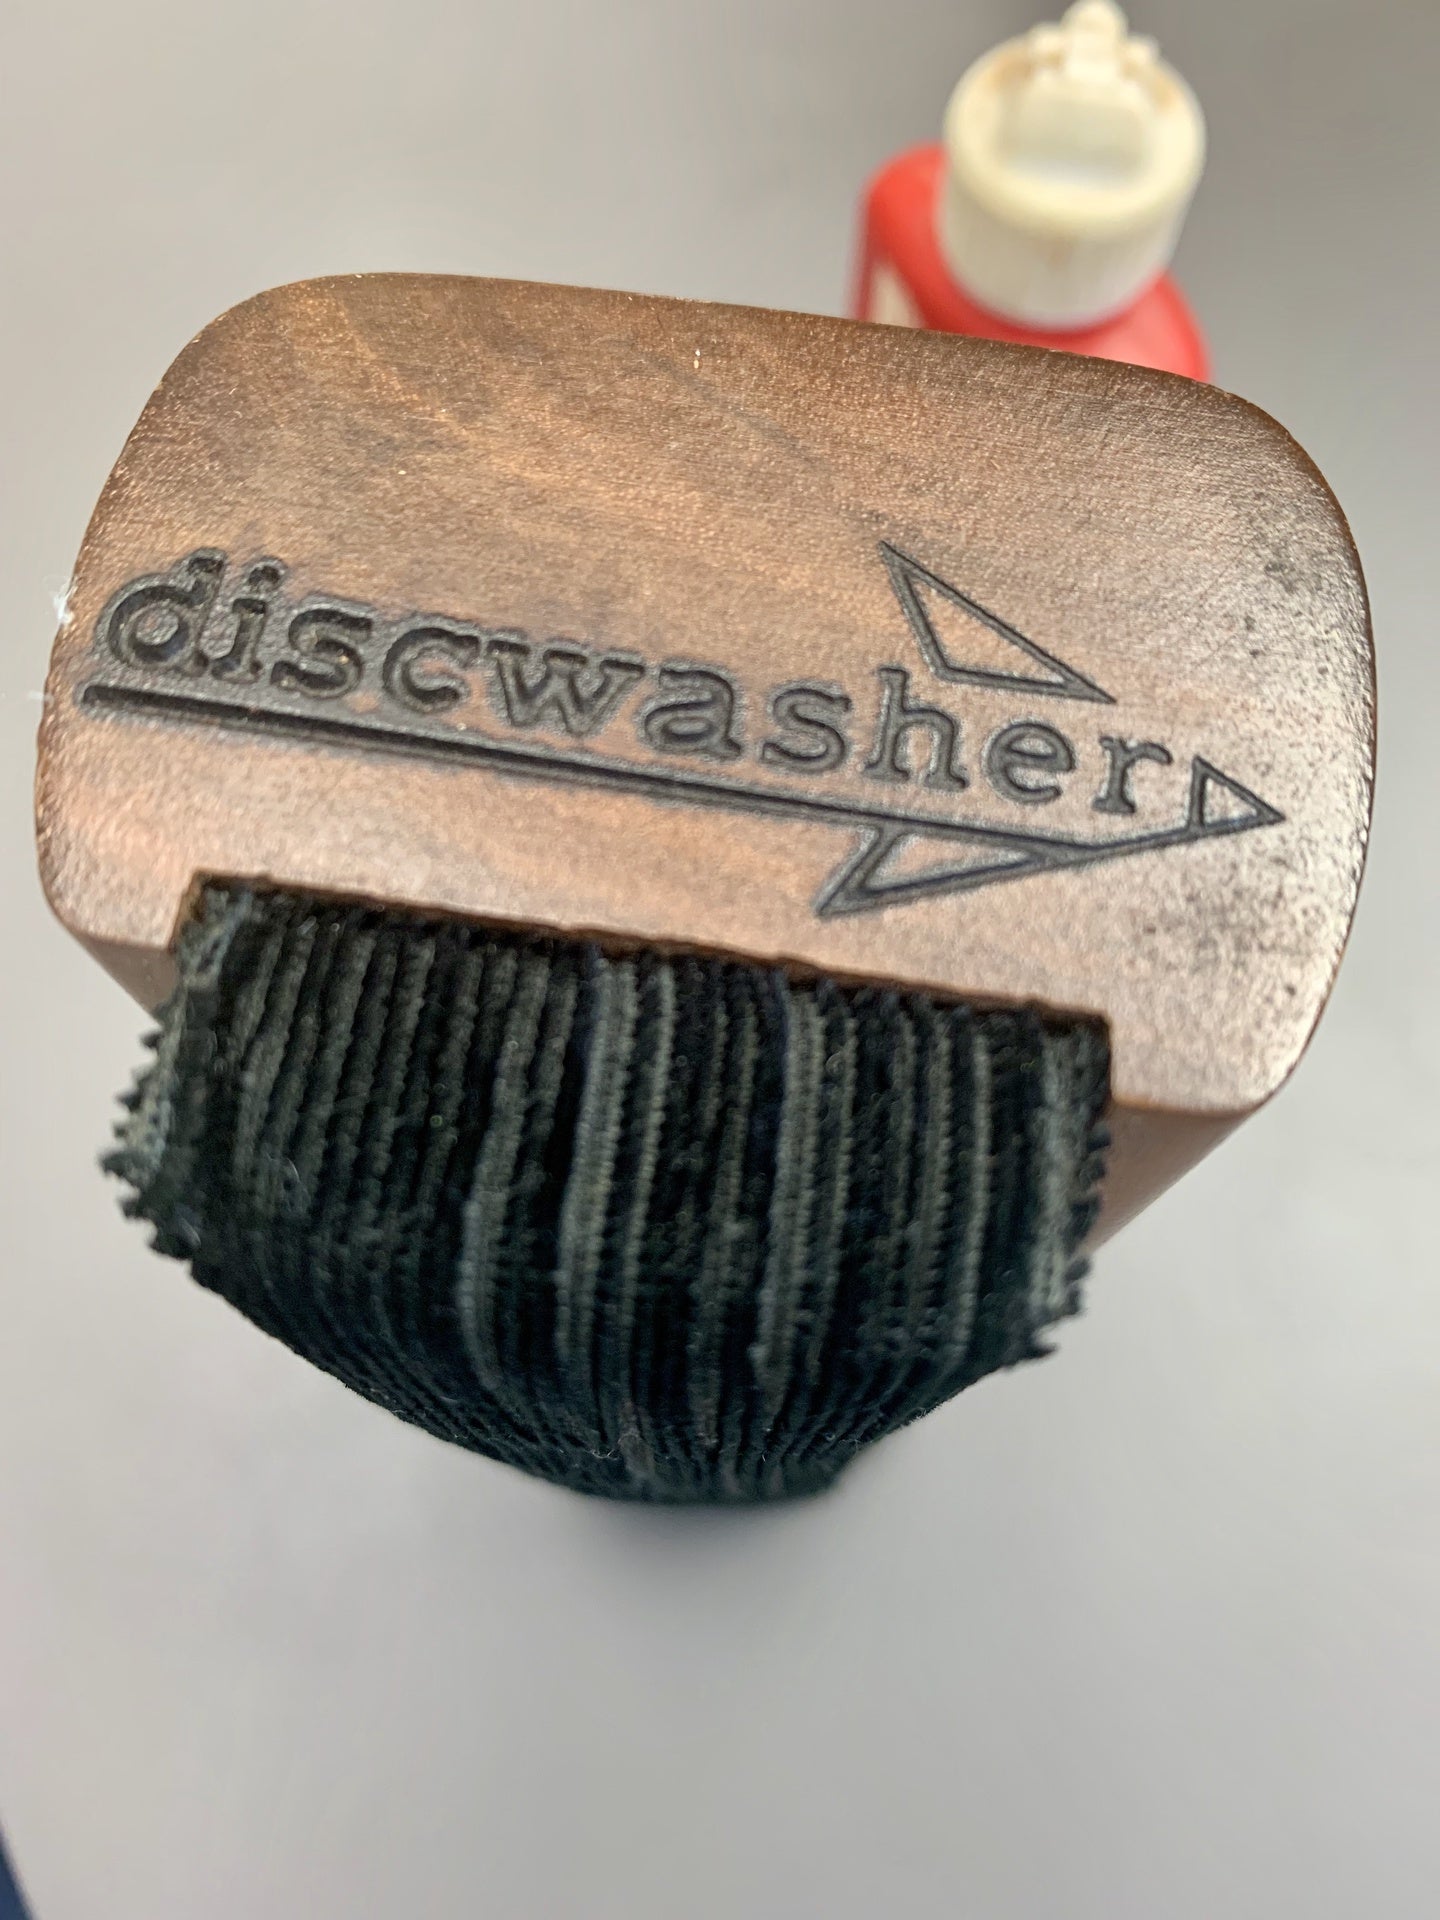 Discwasher Record Cleaners (no case)